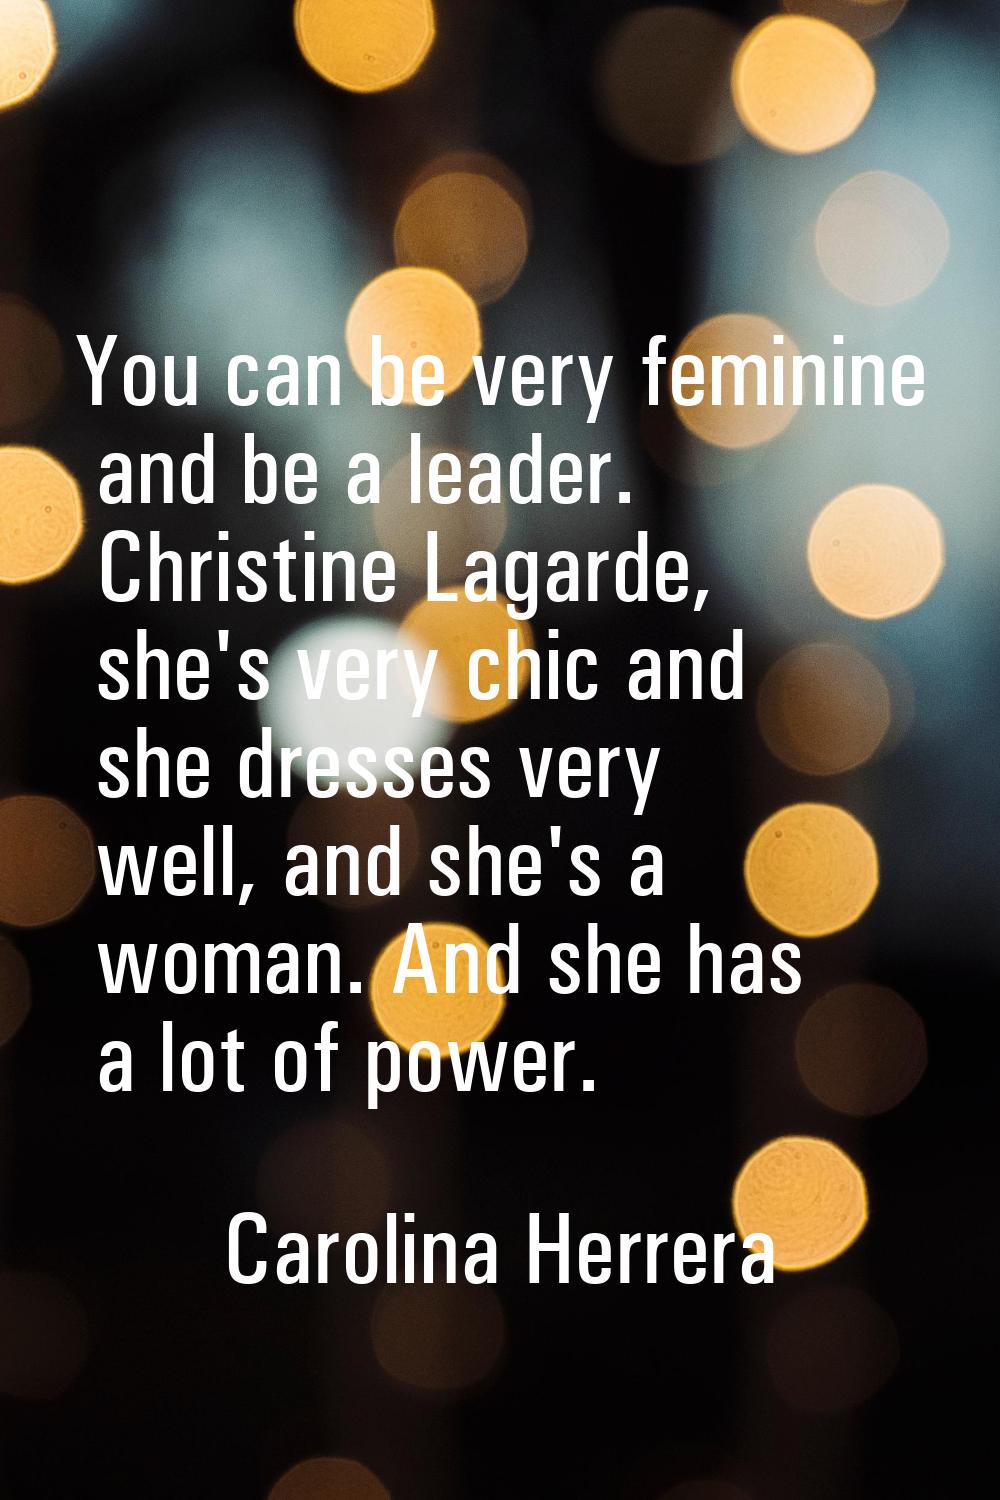 You can be very feminine and be a leader. Christine Lagarde, she's very chic and she dresses very w